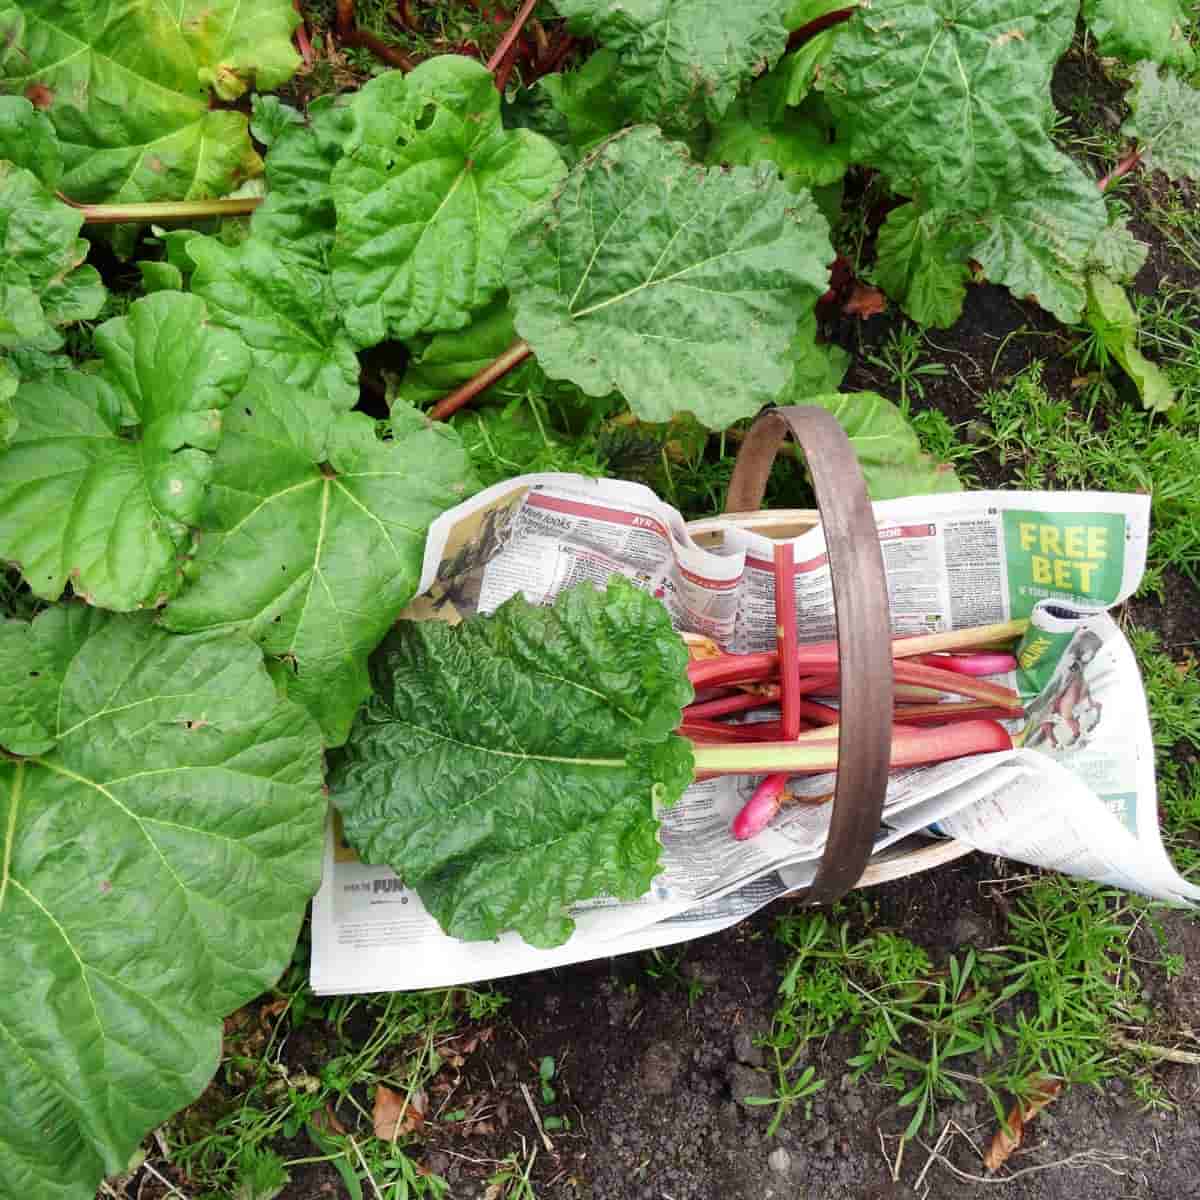 Rhubarb growing in garden and some cut in basket